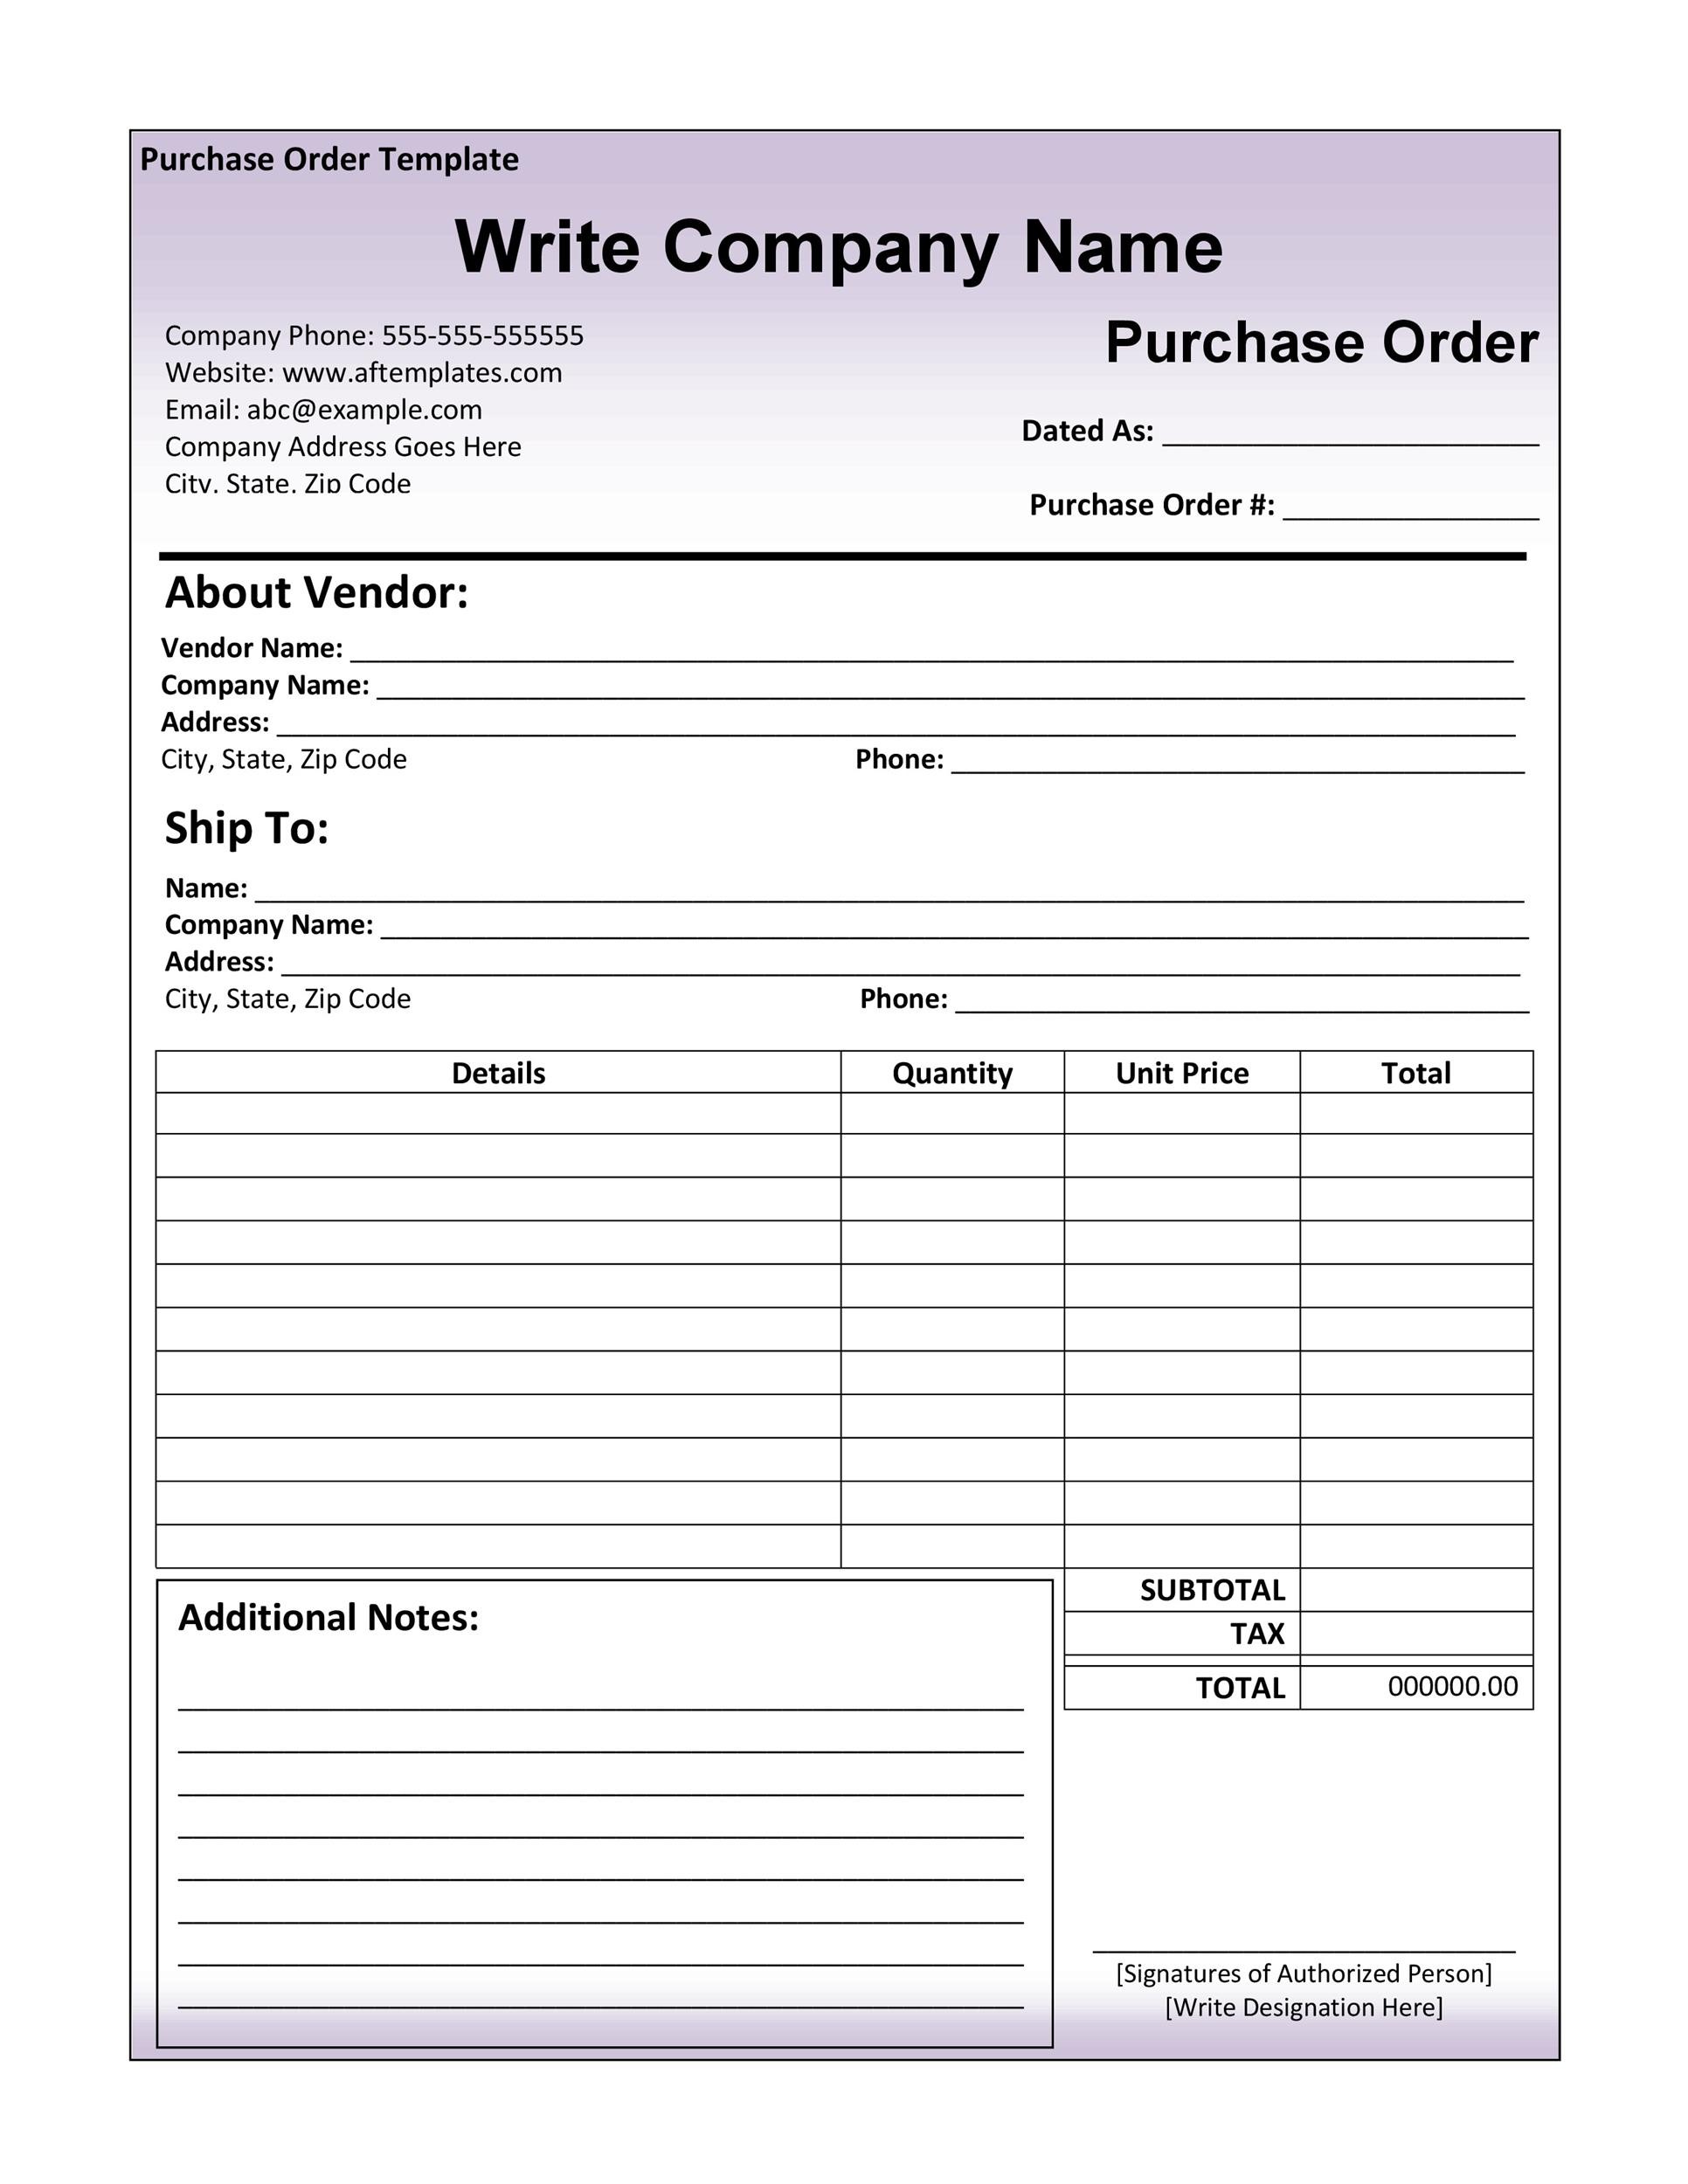 Purchase Order Template Uk 7 Signs You re In Love With Bybloggers